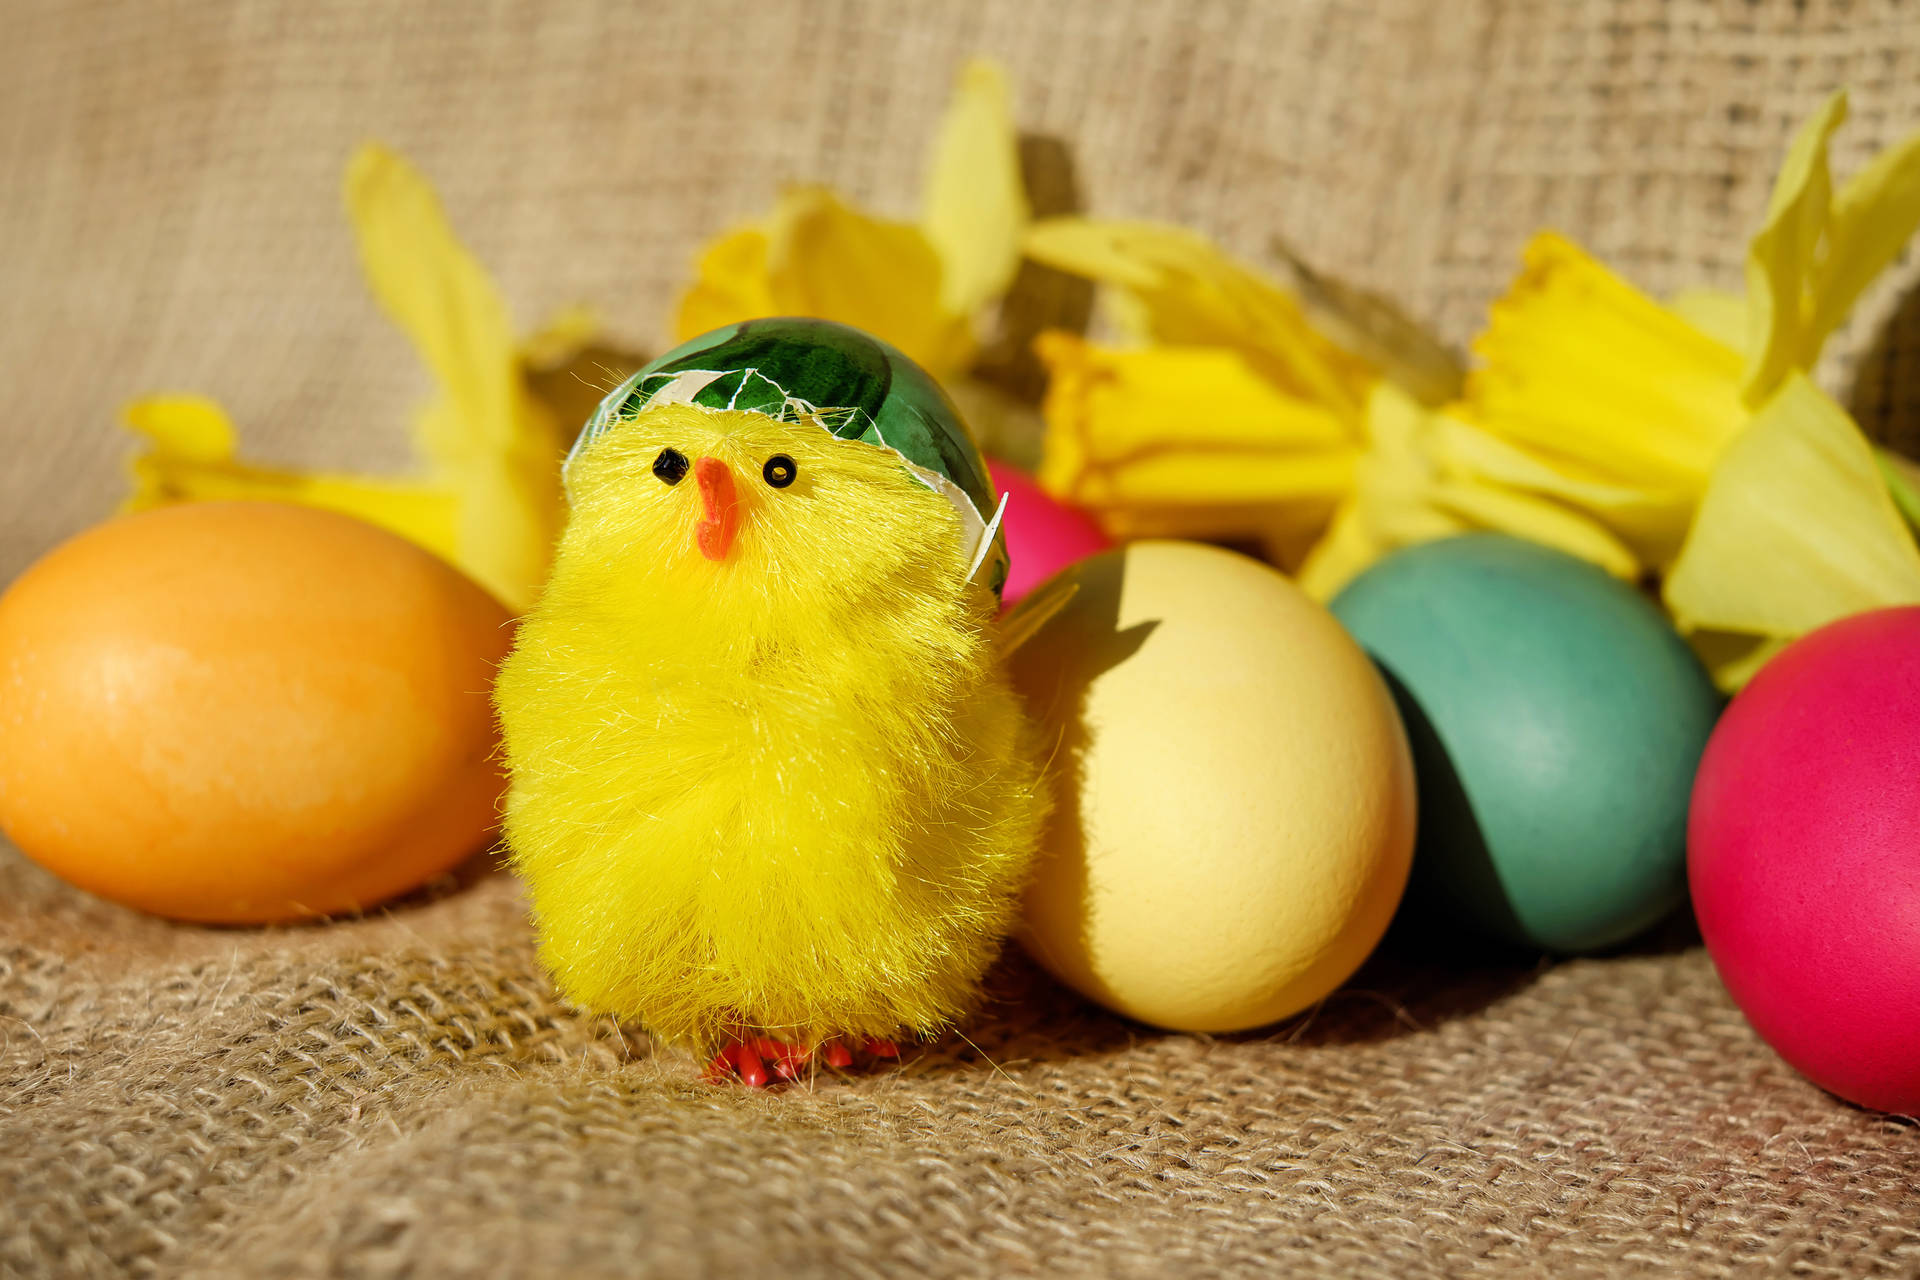 Hop into Spring with Easter eggs and a yellow chick! Wallpaper